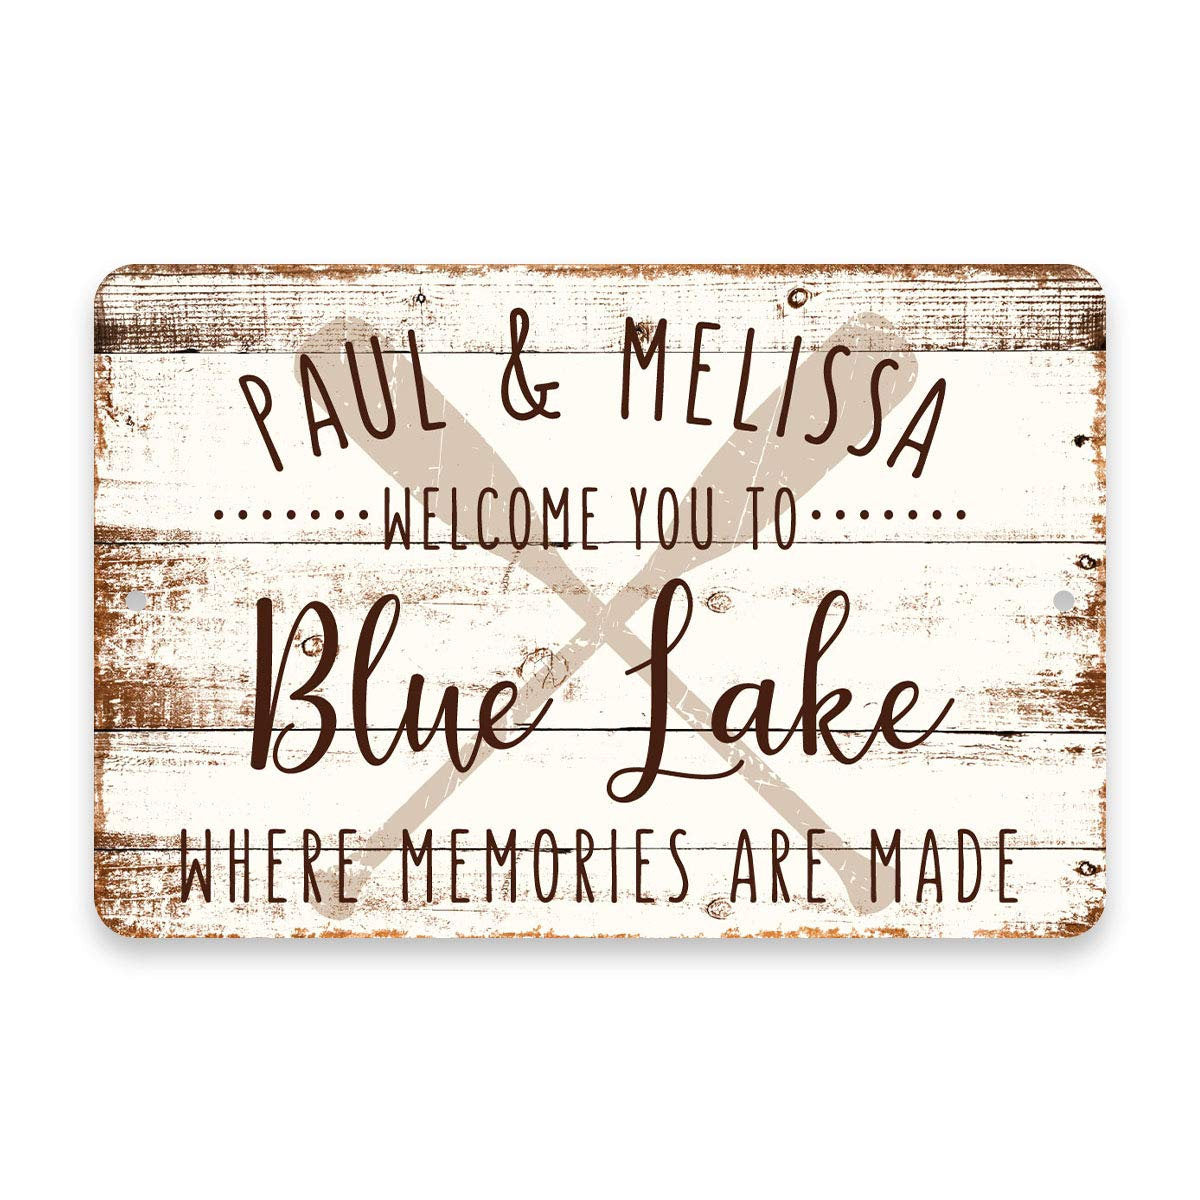 Personalized Welcome to Blue Lake Where Memories are Made Sign - 8 X 12 Metal Sign with Wood Look